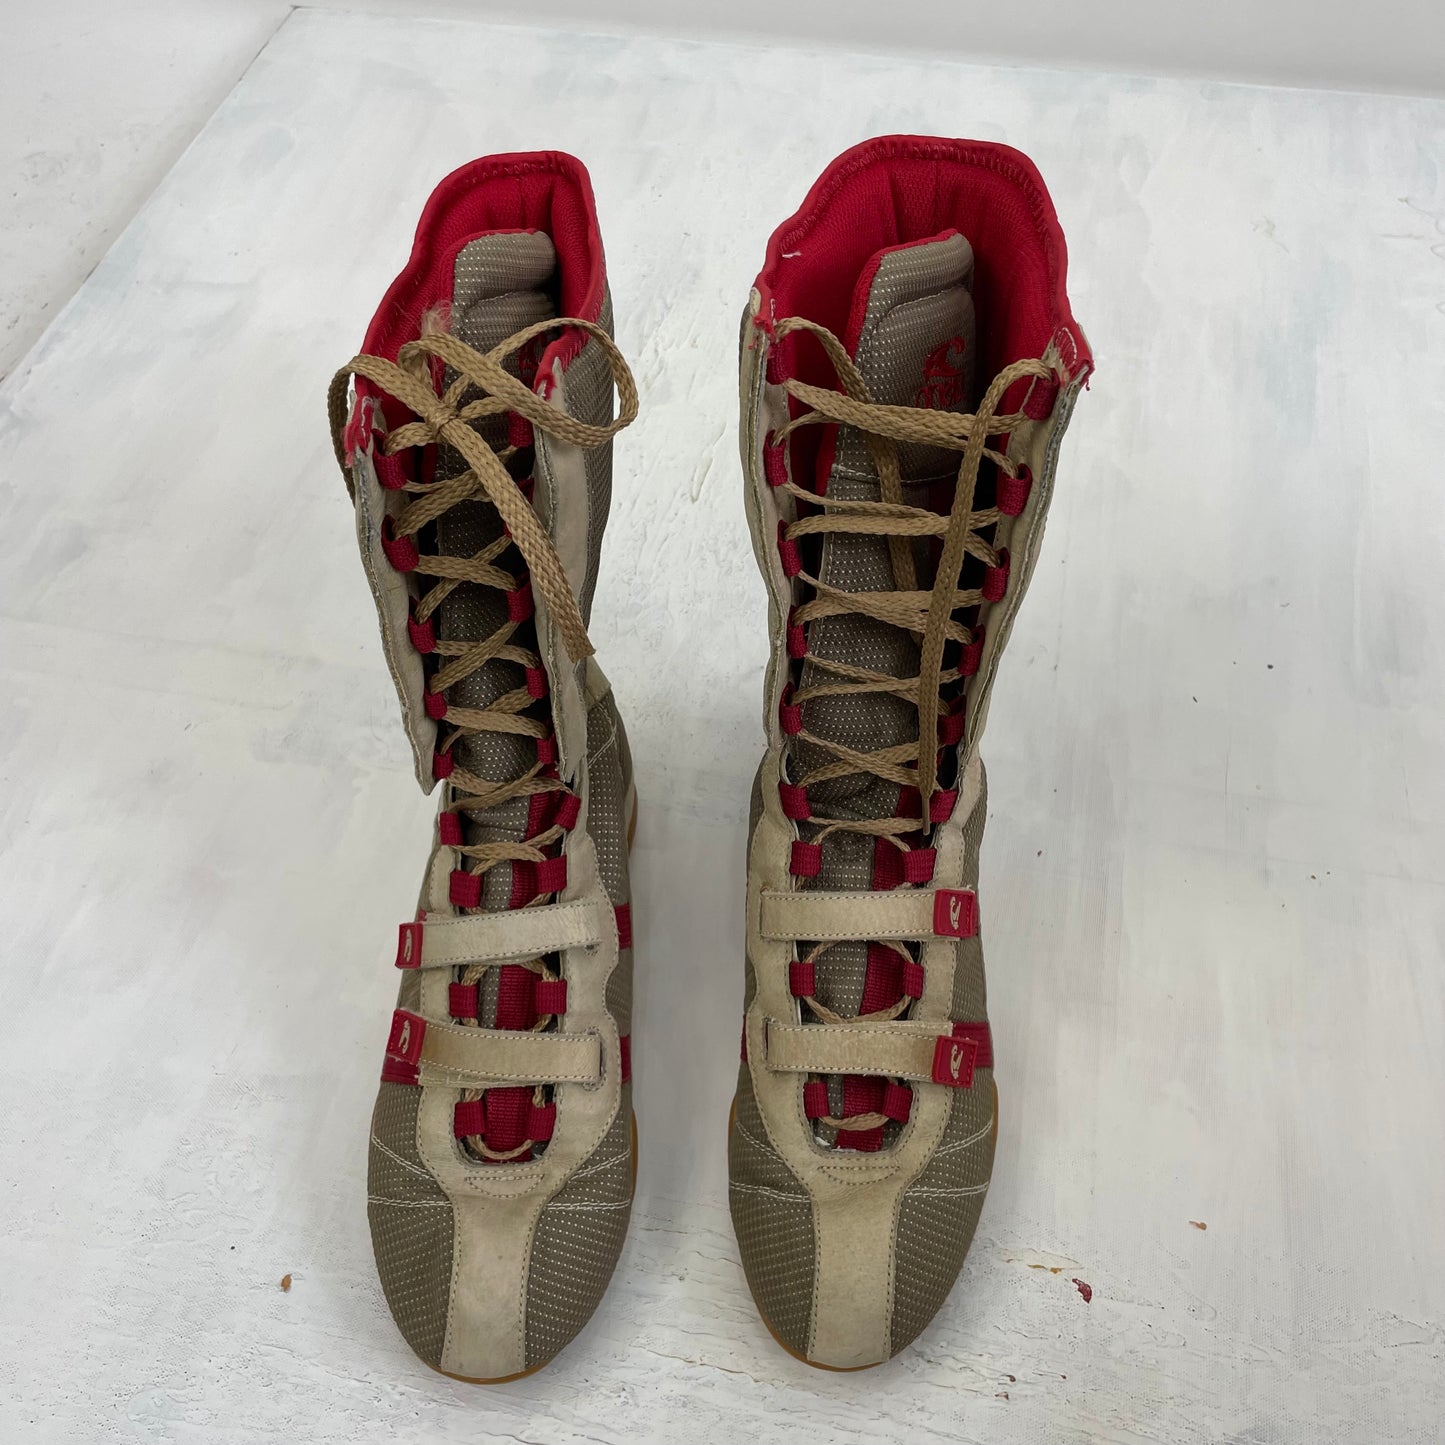 ⭐️ ELEVATED SPORTSWEAR DROP | size 5 grey/ red o’neill boxing boots